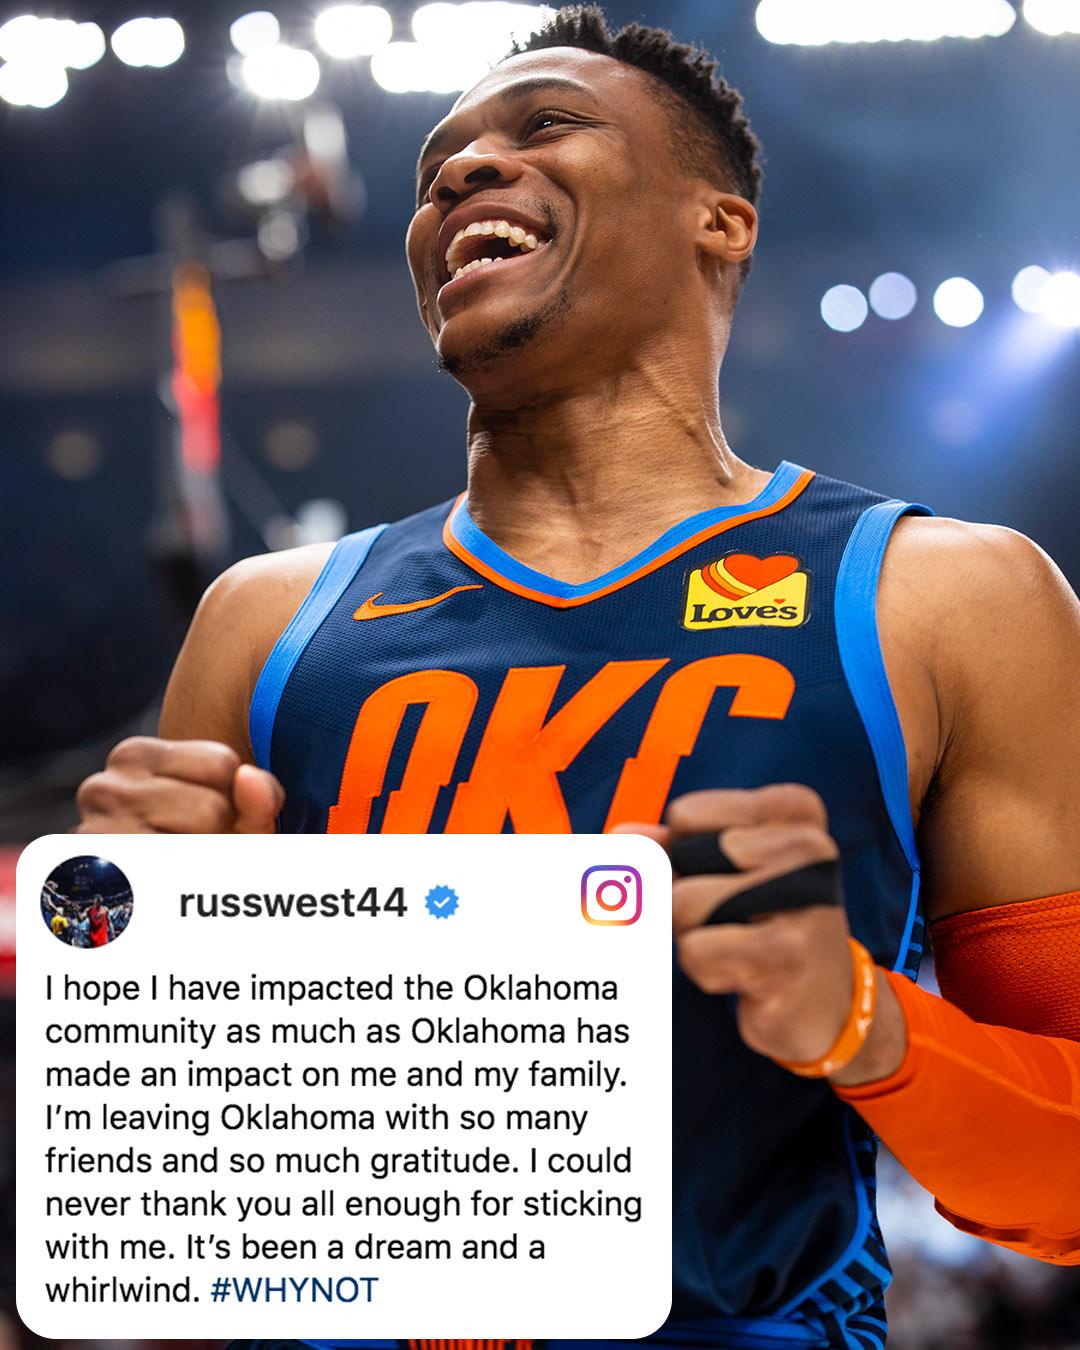 Russell Westbrook says goodbye to Oklahoma City in touching post